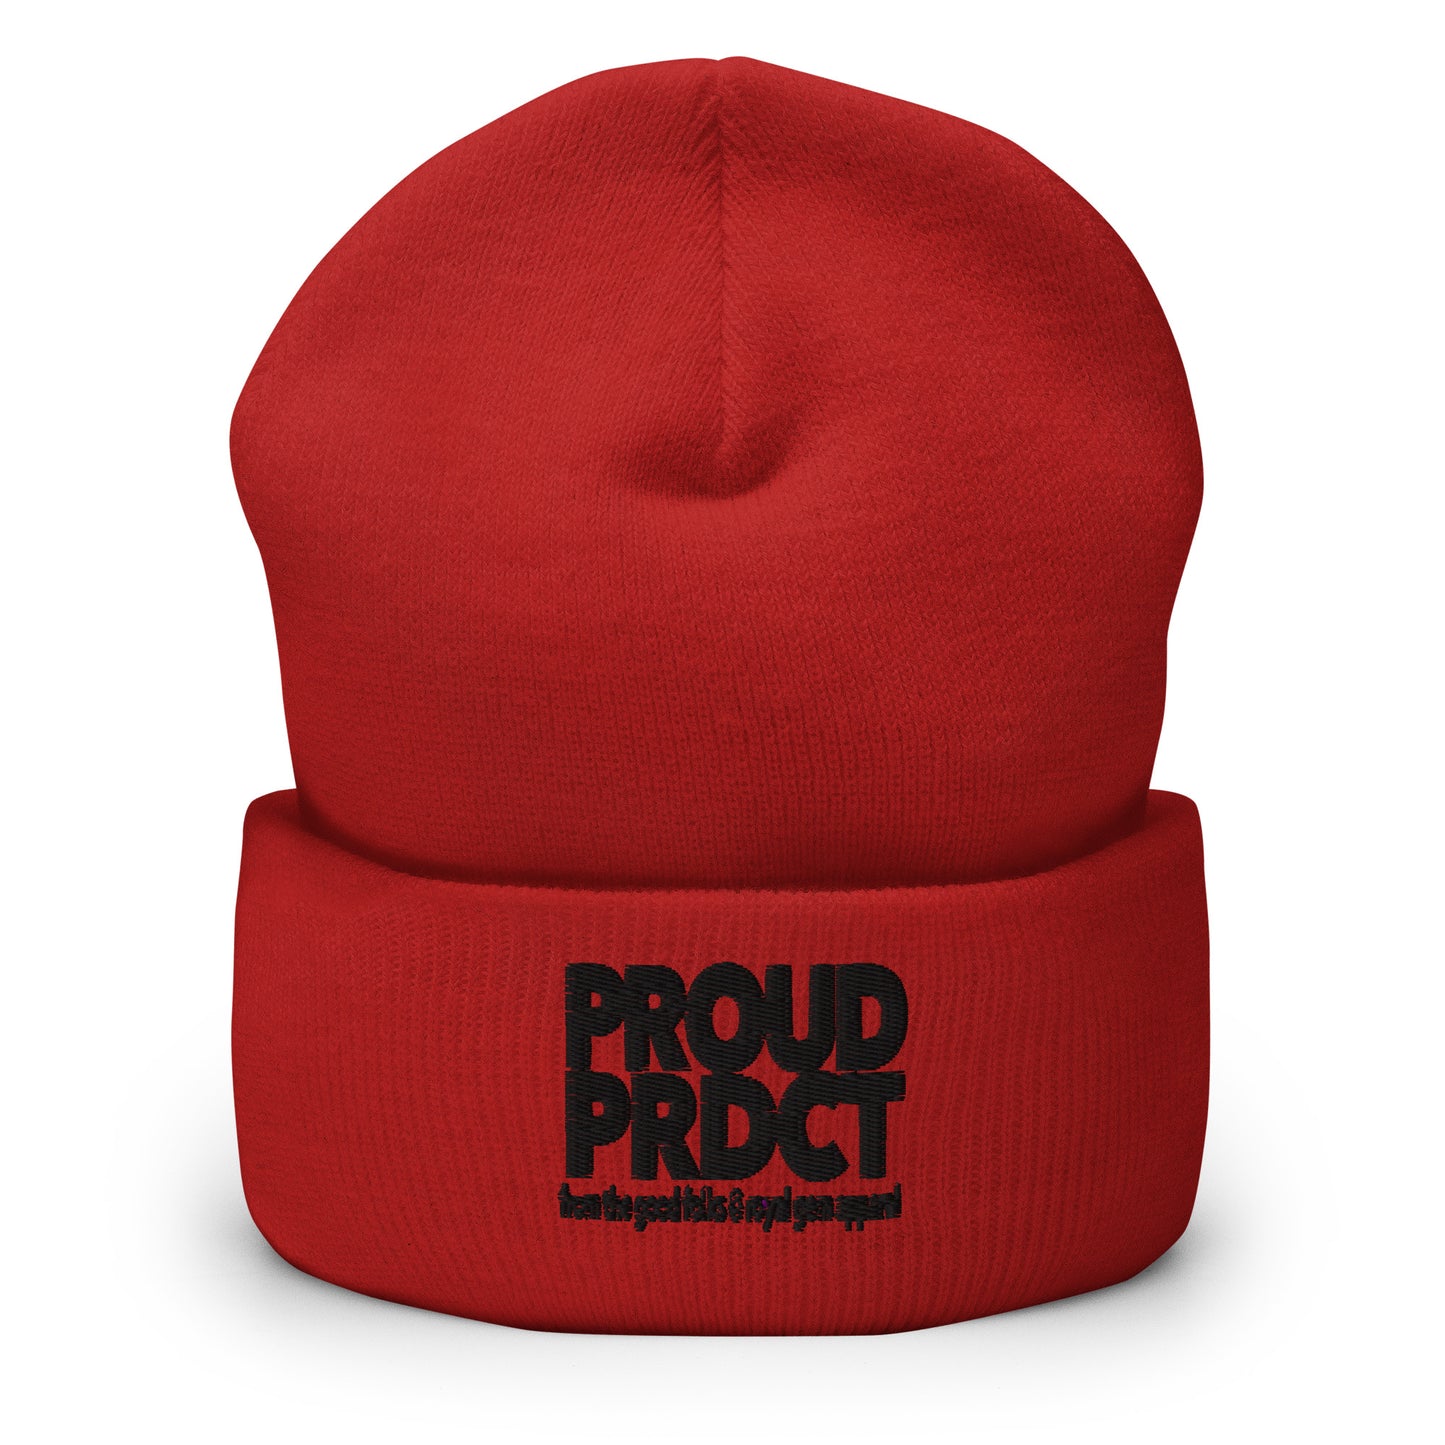 "Proud Product" Beanie